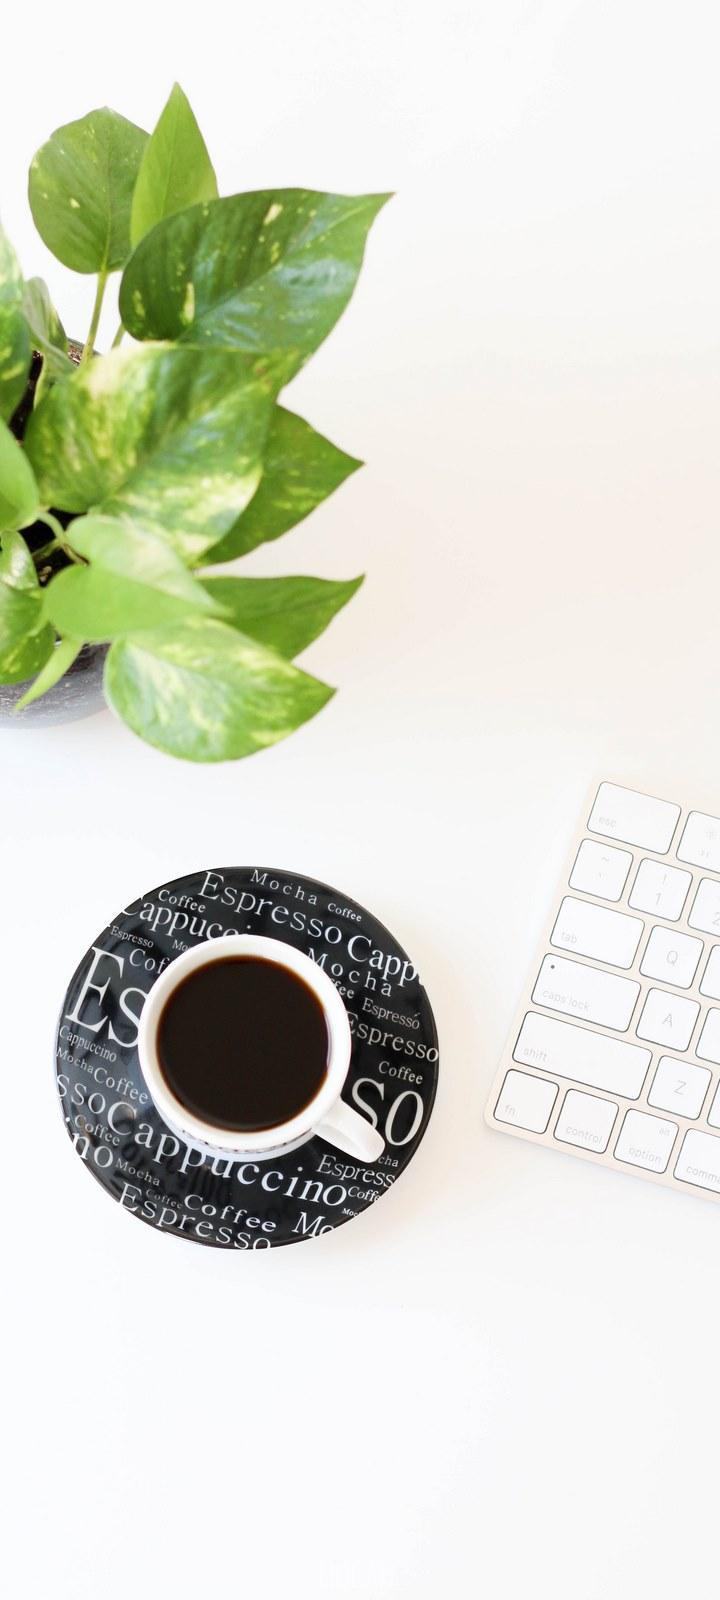 HD wallpaper, A Cup Of Coffee On A Coaster Next To A Green Plant And An Apple Keyboard, Minimal Workspace, 720X1600, Infinix Hot 8 Background Hd